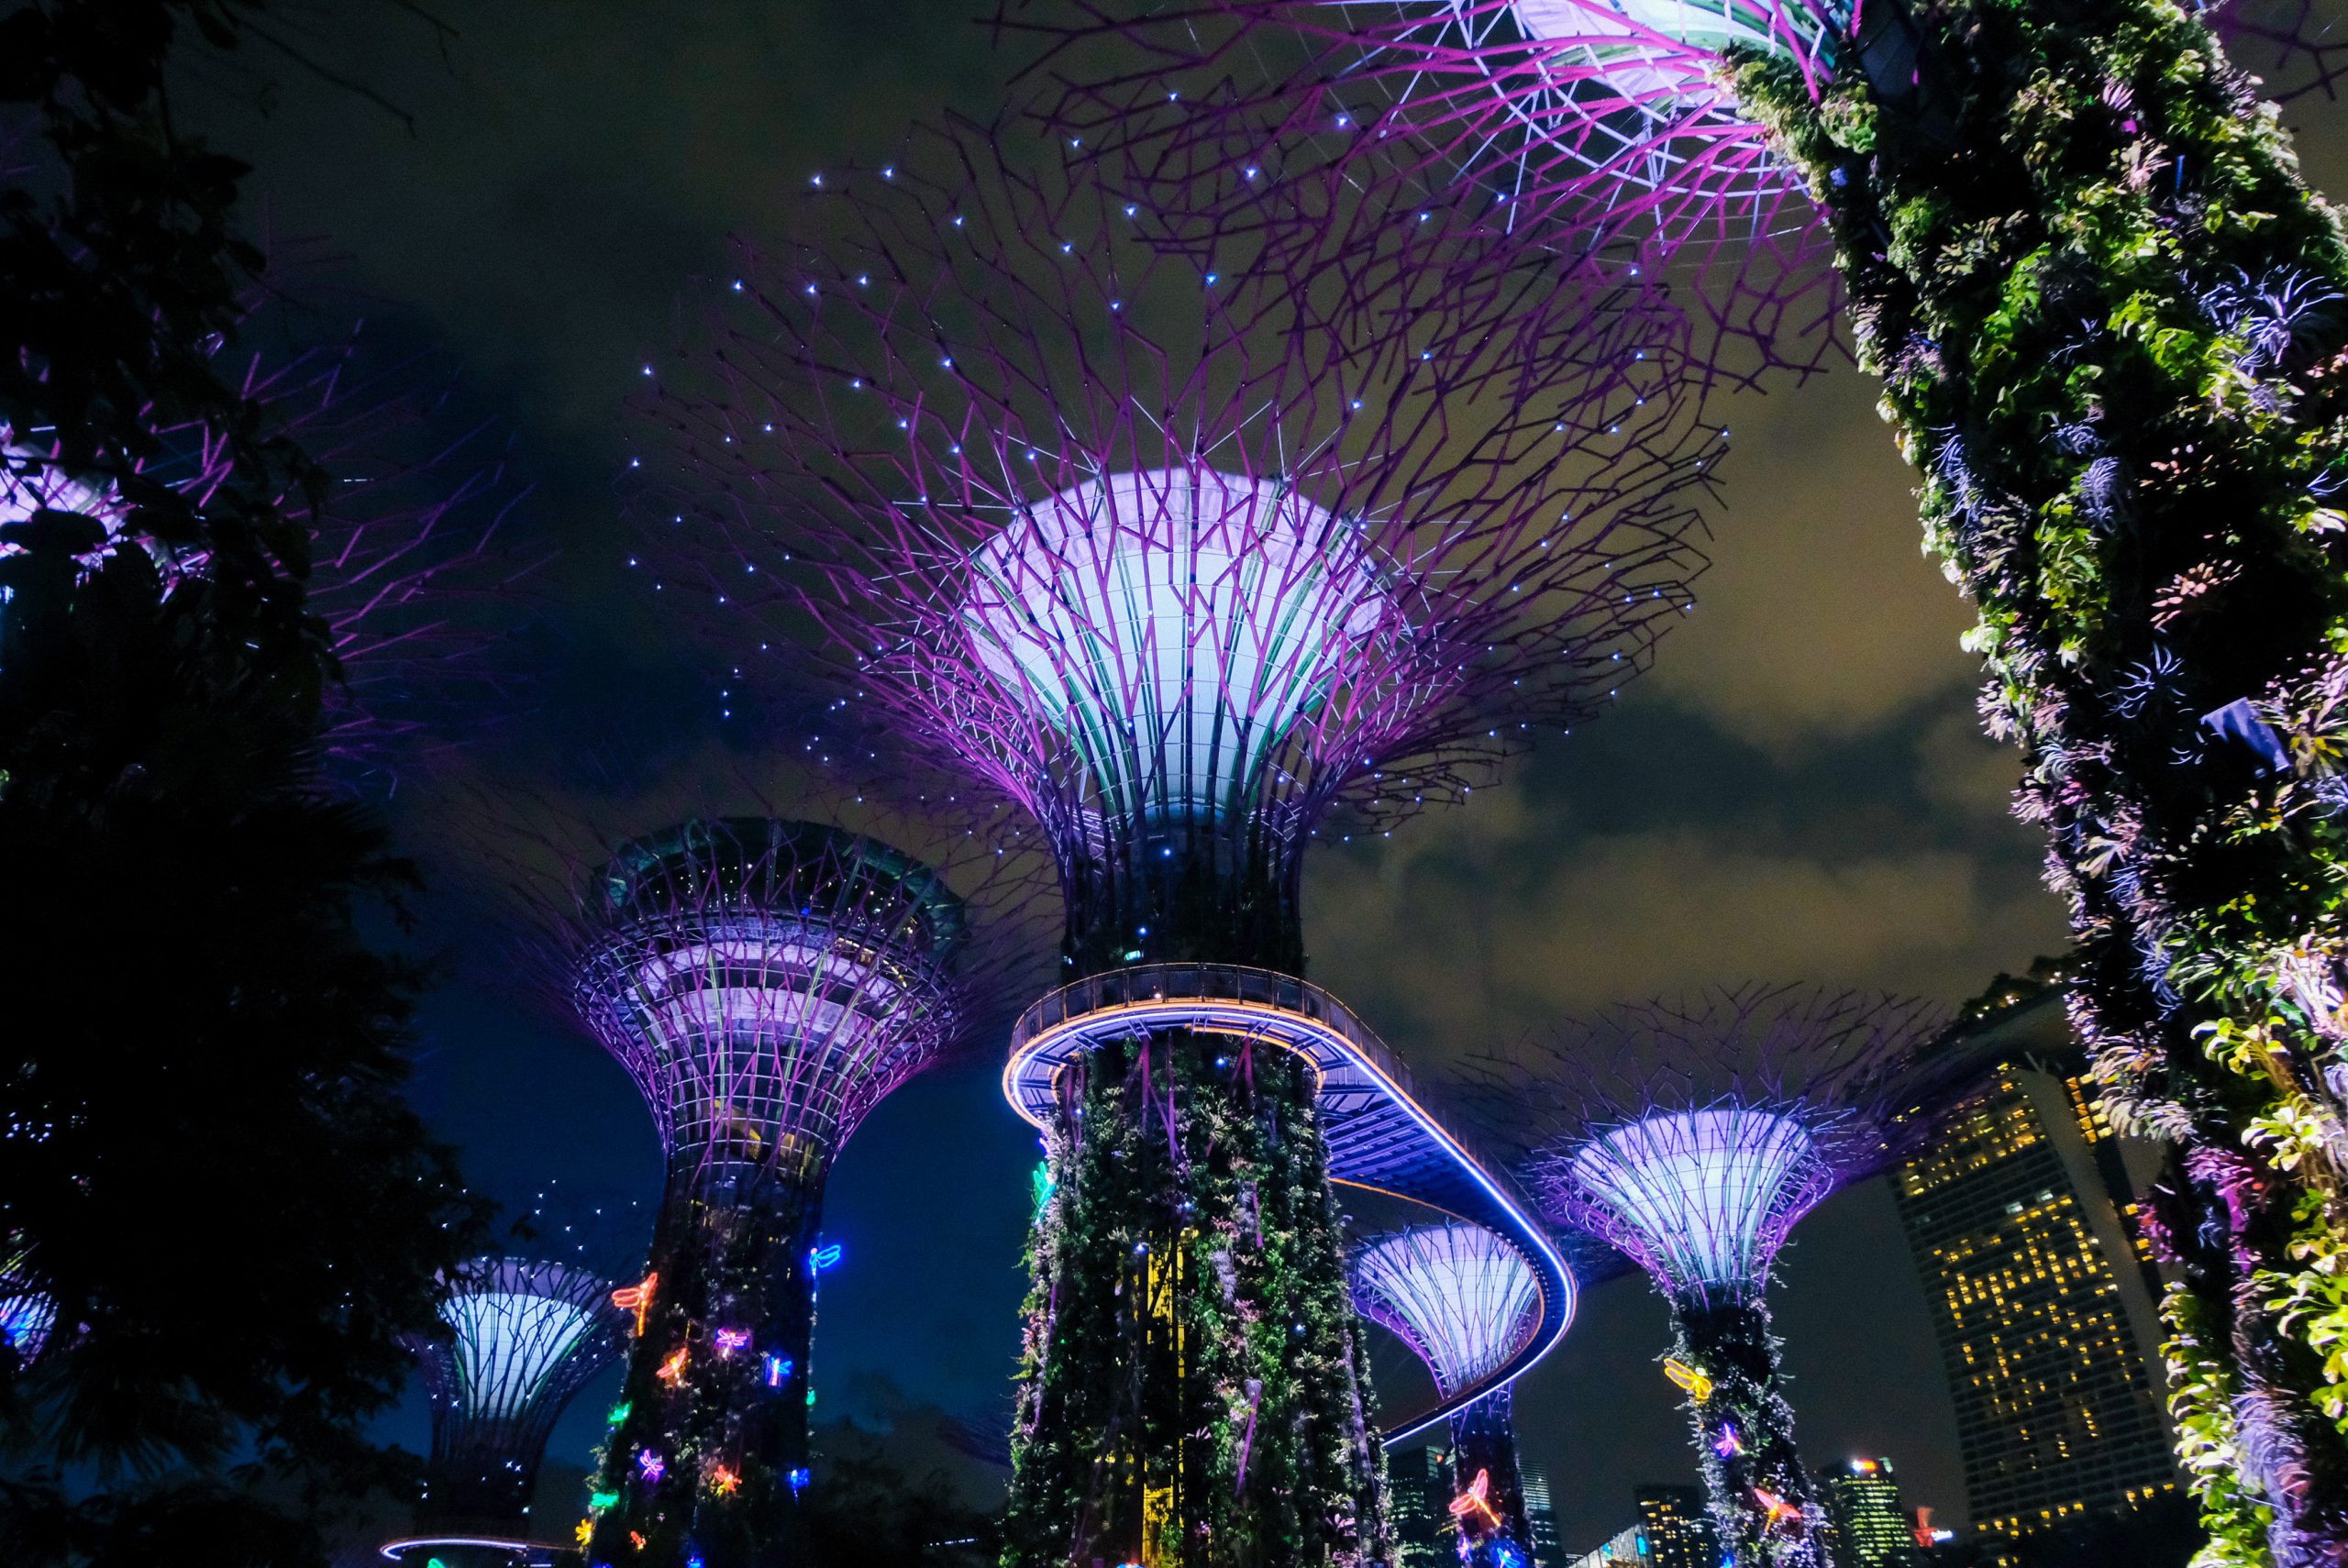 photo of Gardens by the Bay in Singapore, looking up at night with lights